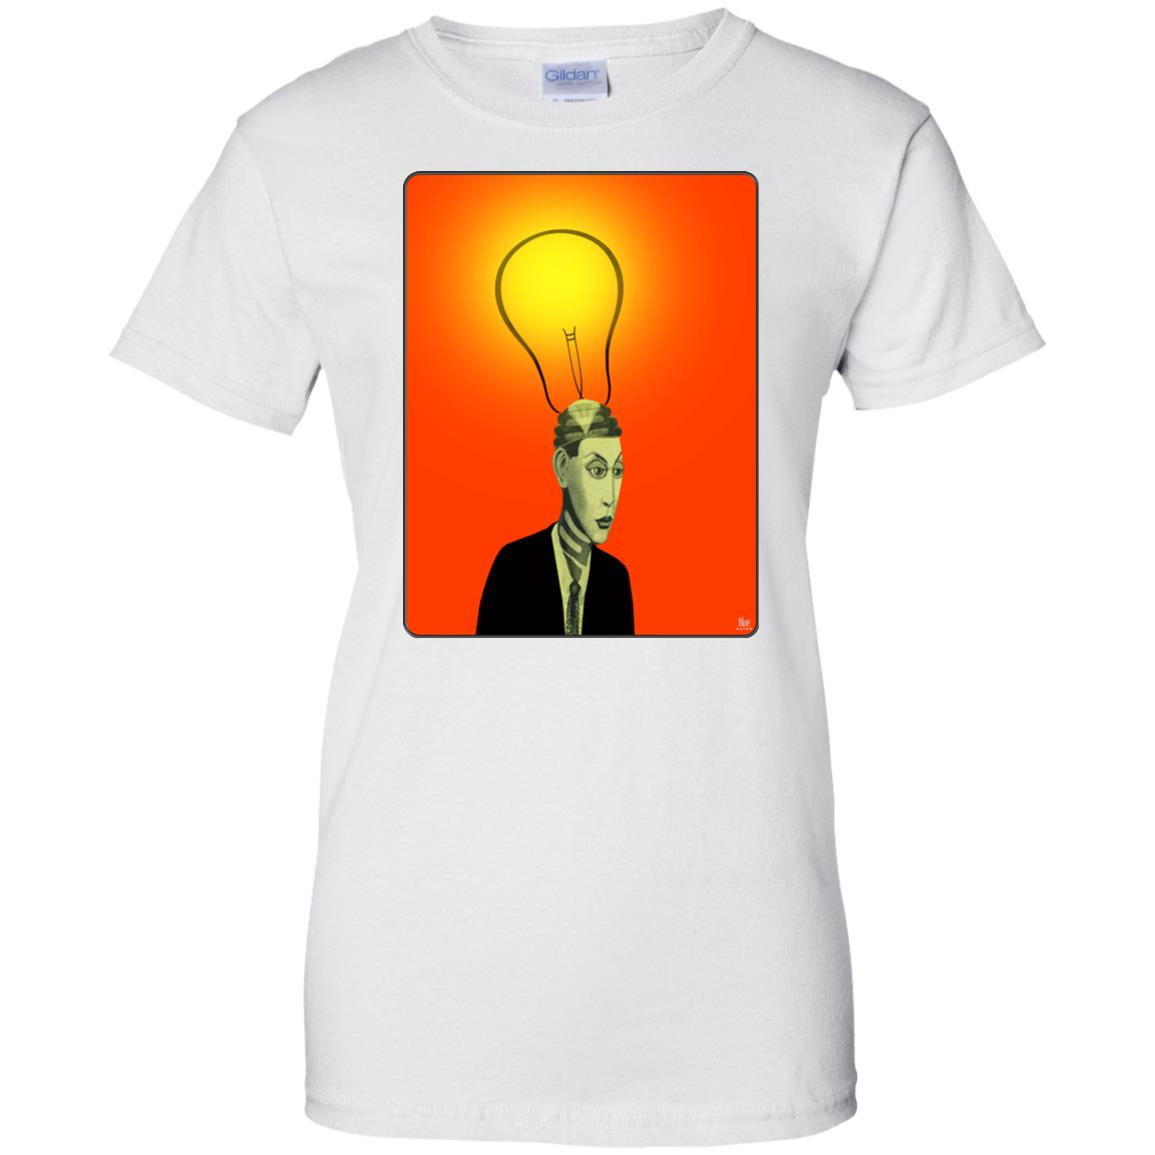 BRIGHT IDEA - Women's Relaxed Fit T-Shirt